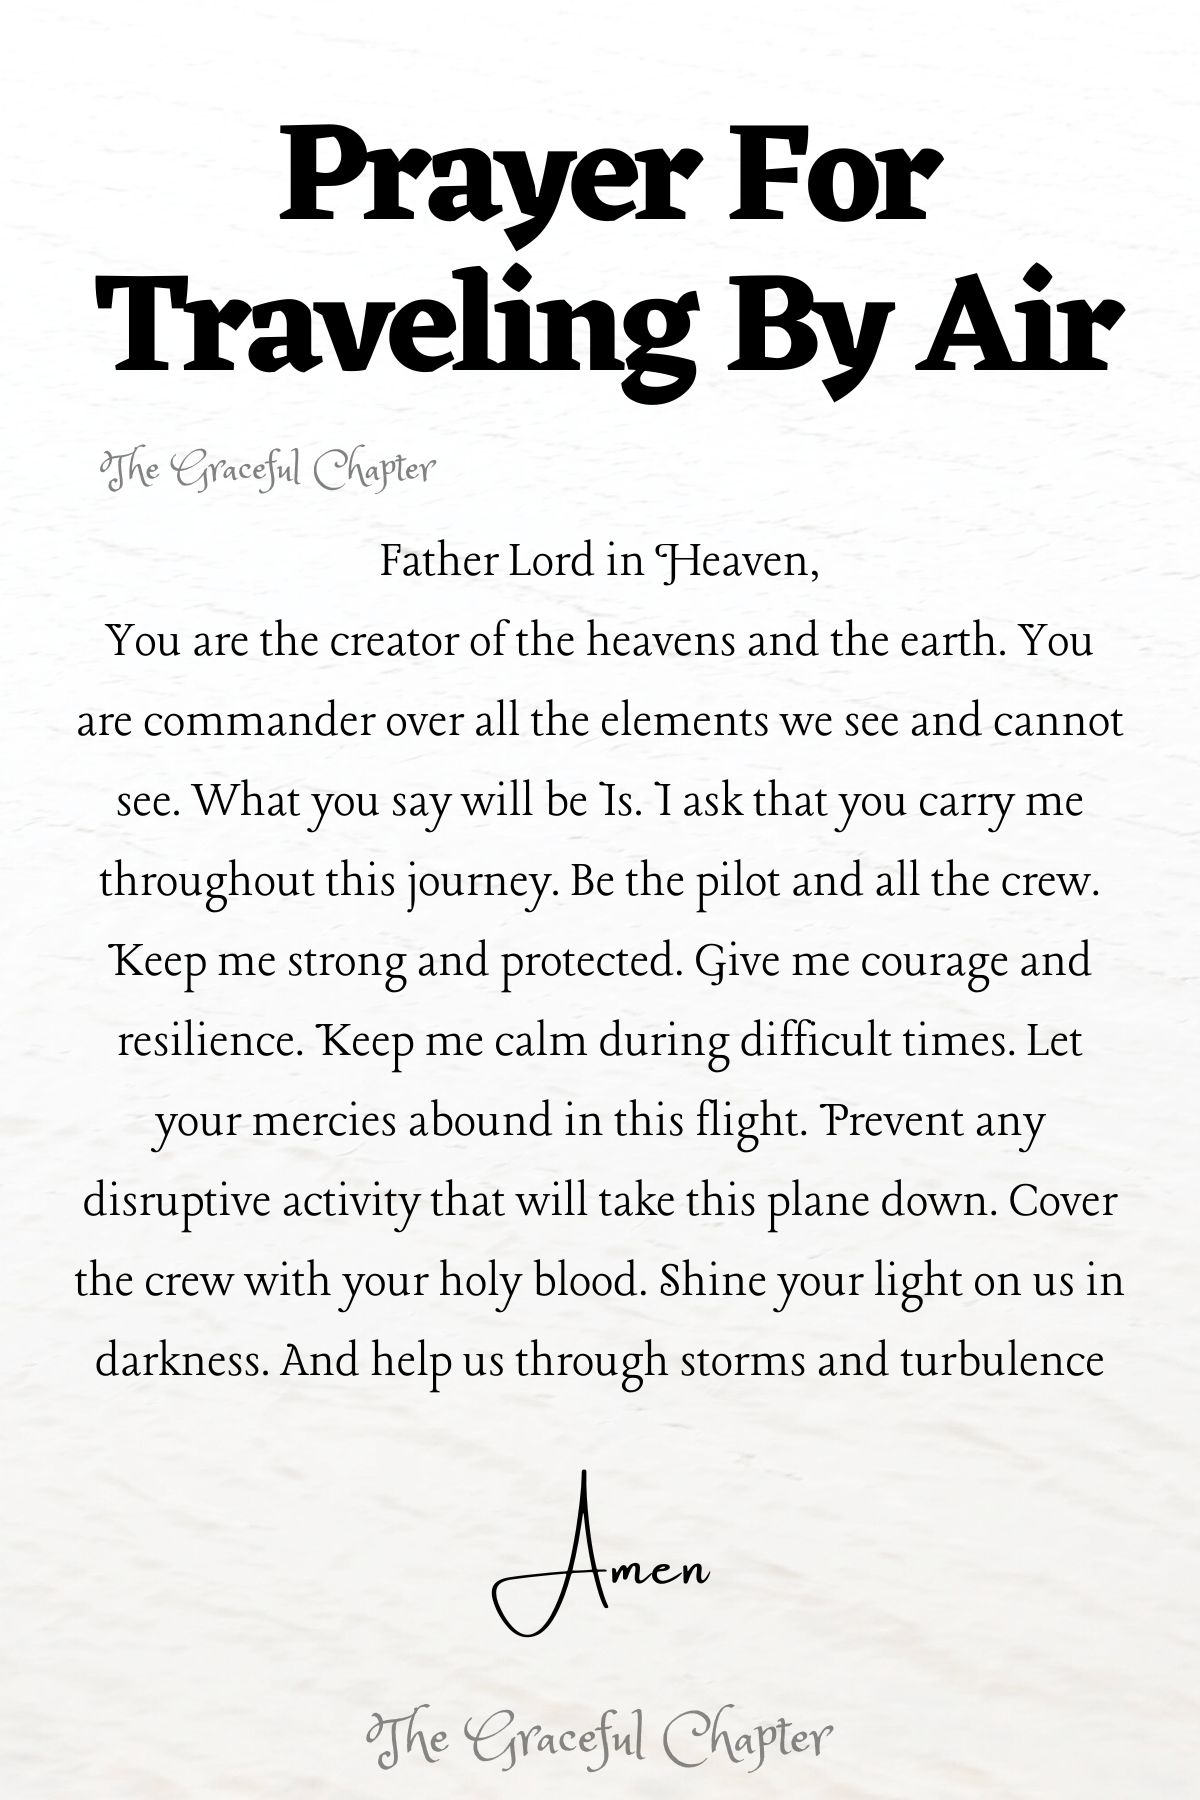 Prayer for traveling by air